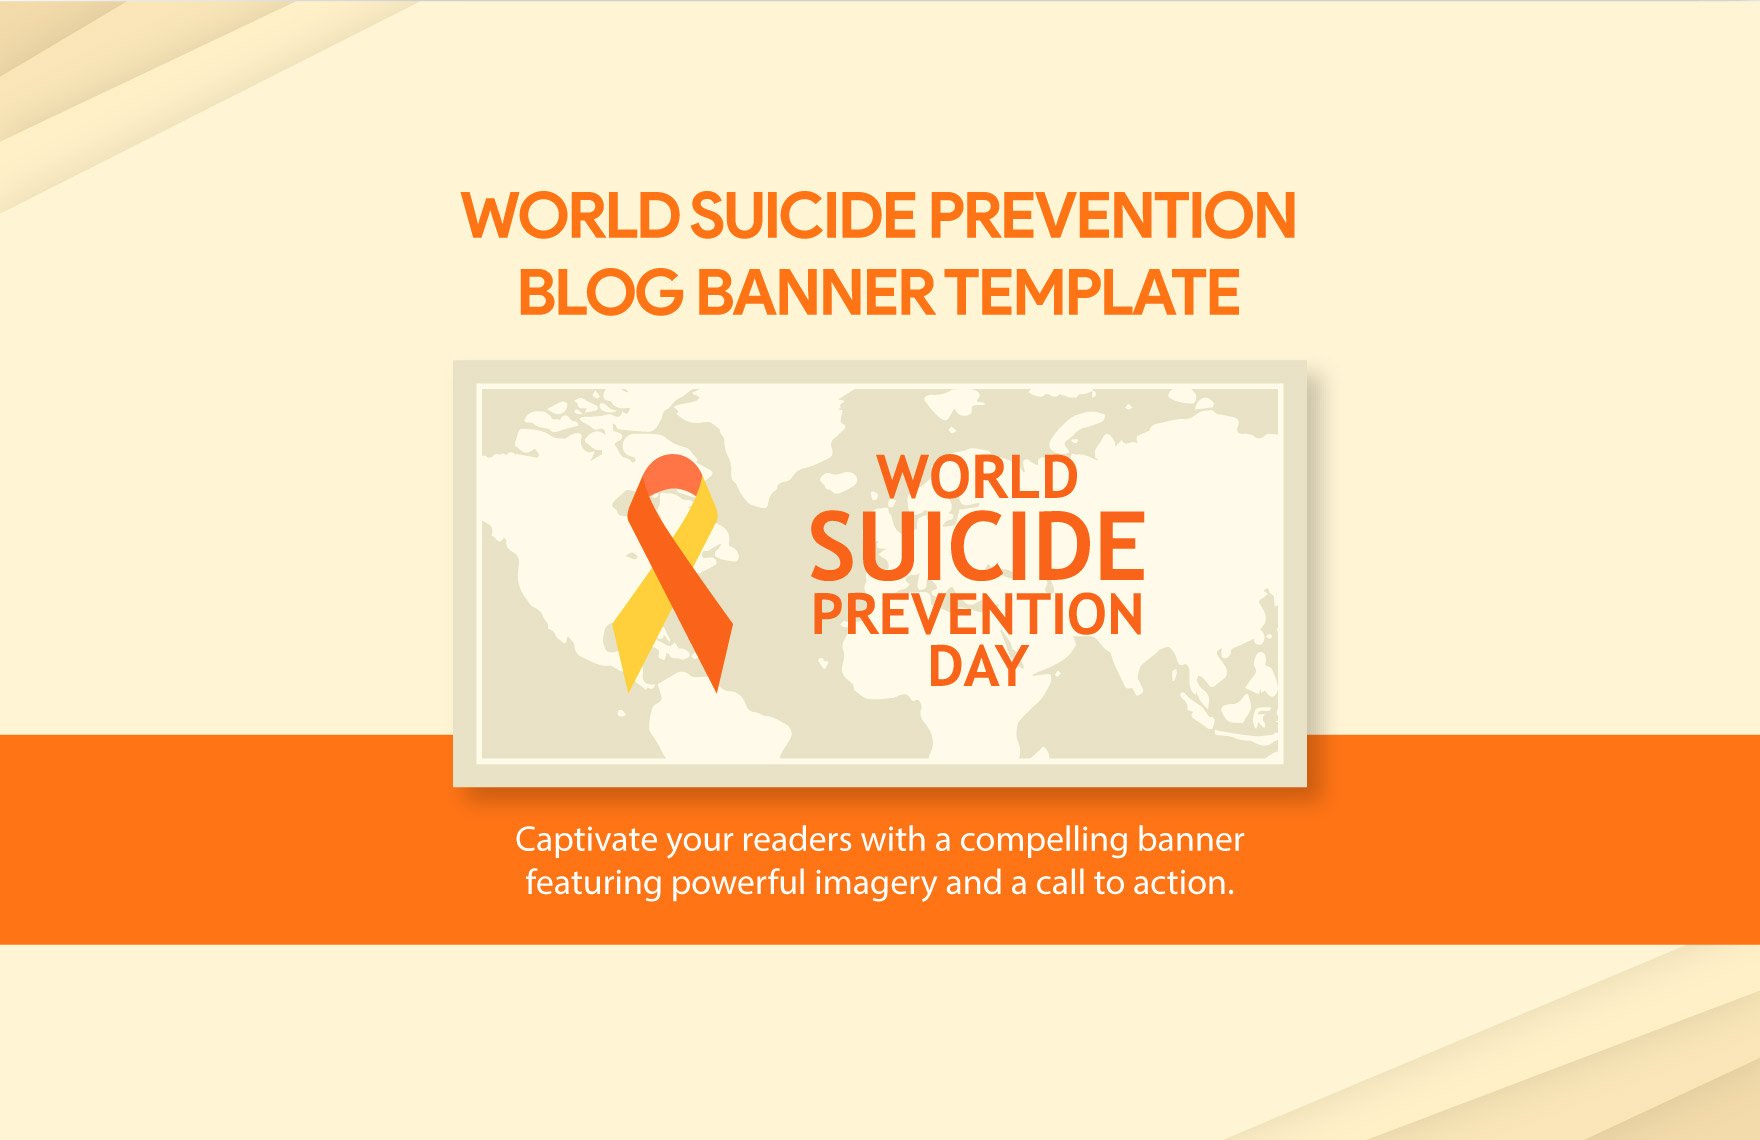 World Suicide Prevention Day Blog Banner Template in Illustrator, PSD, PNG